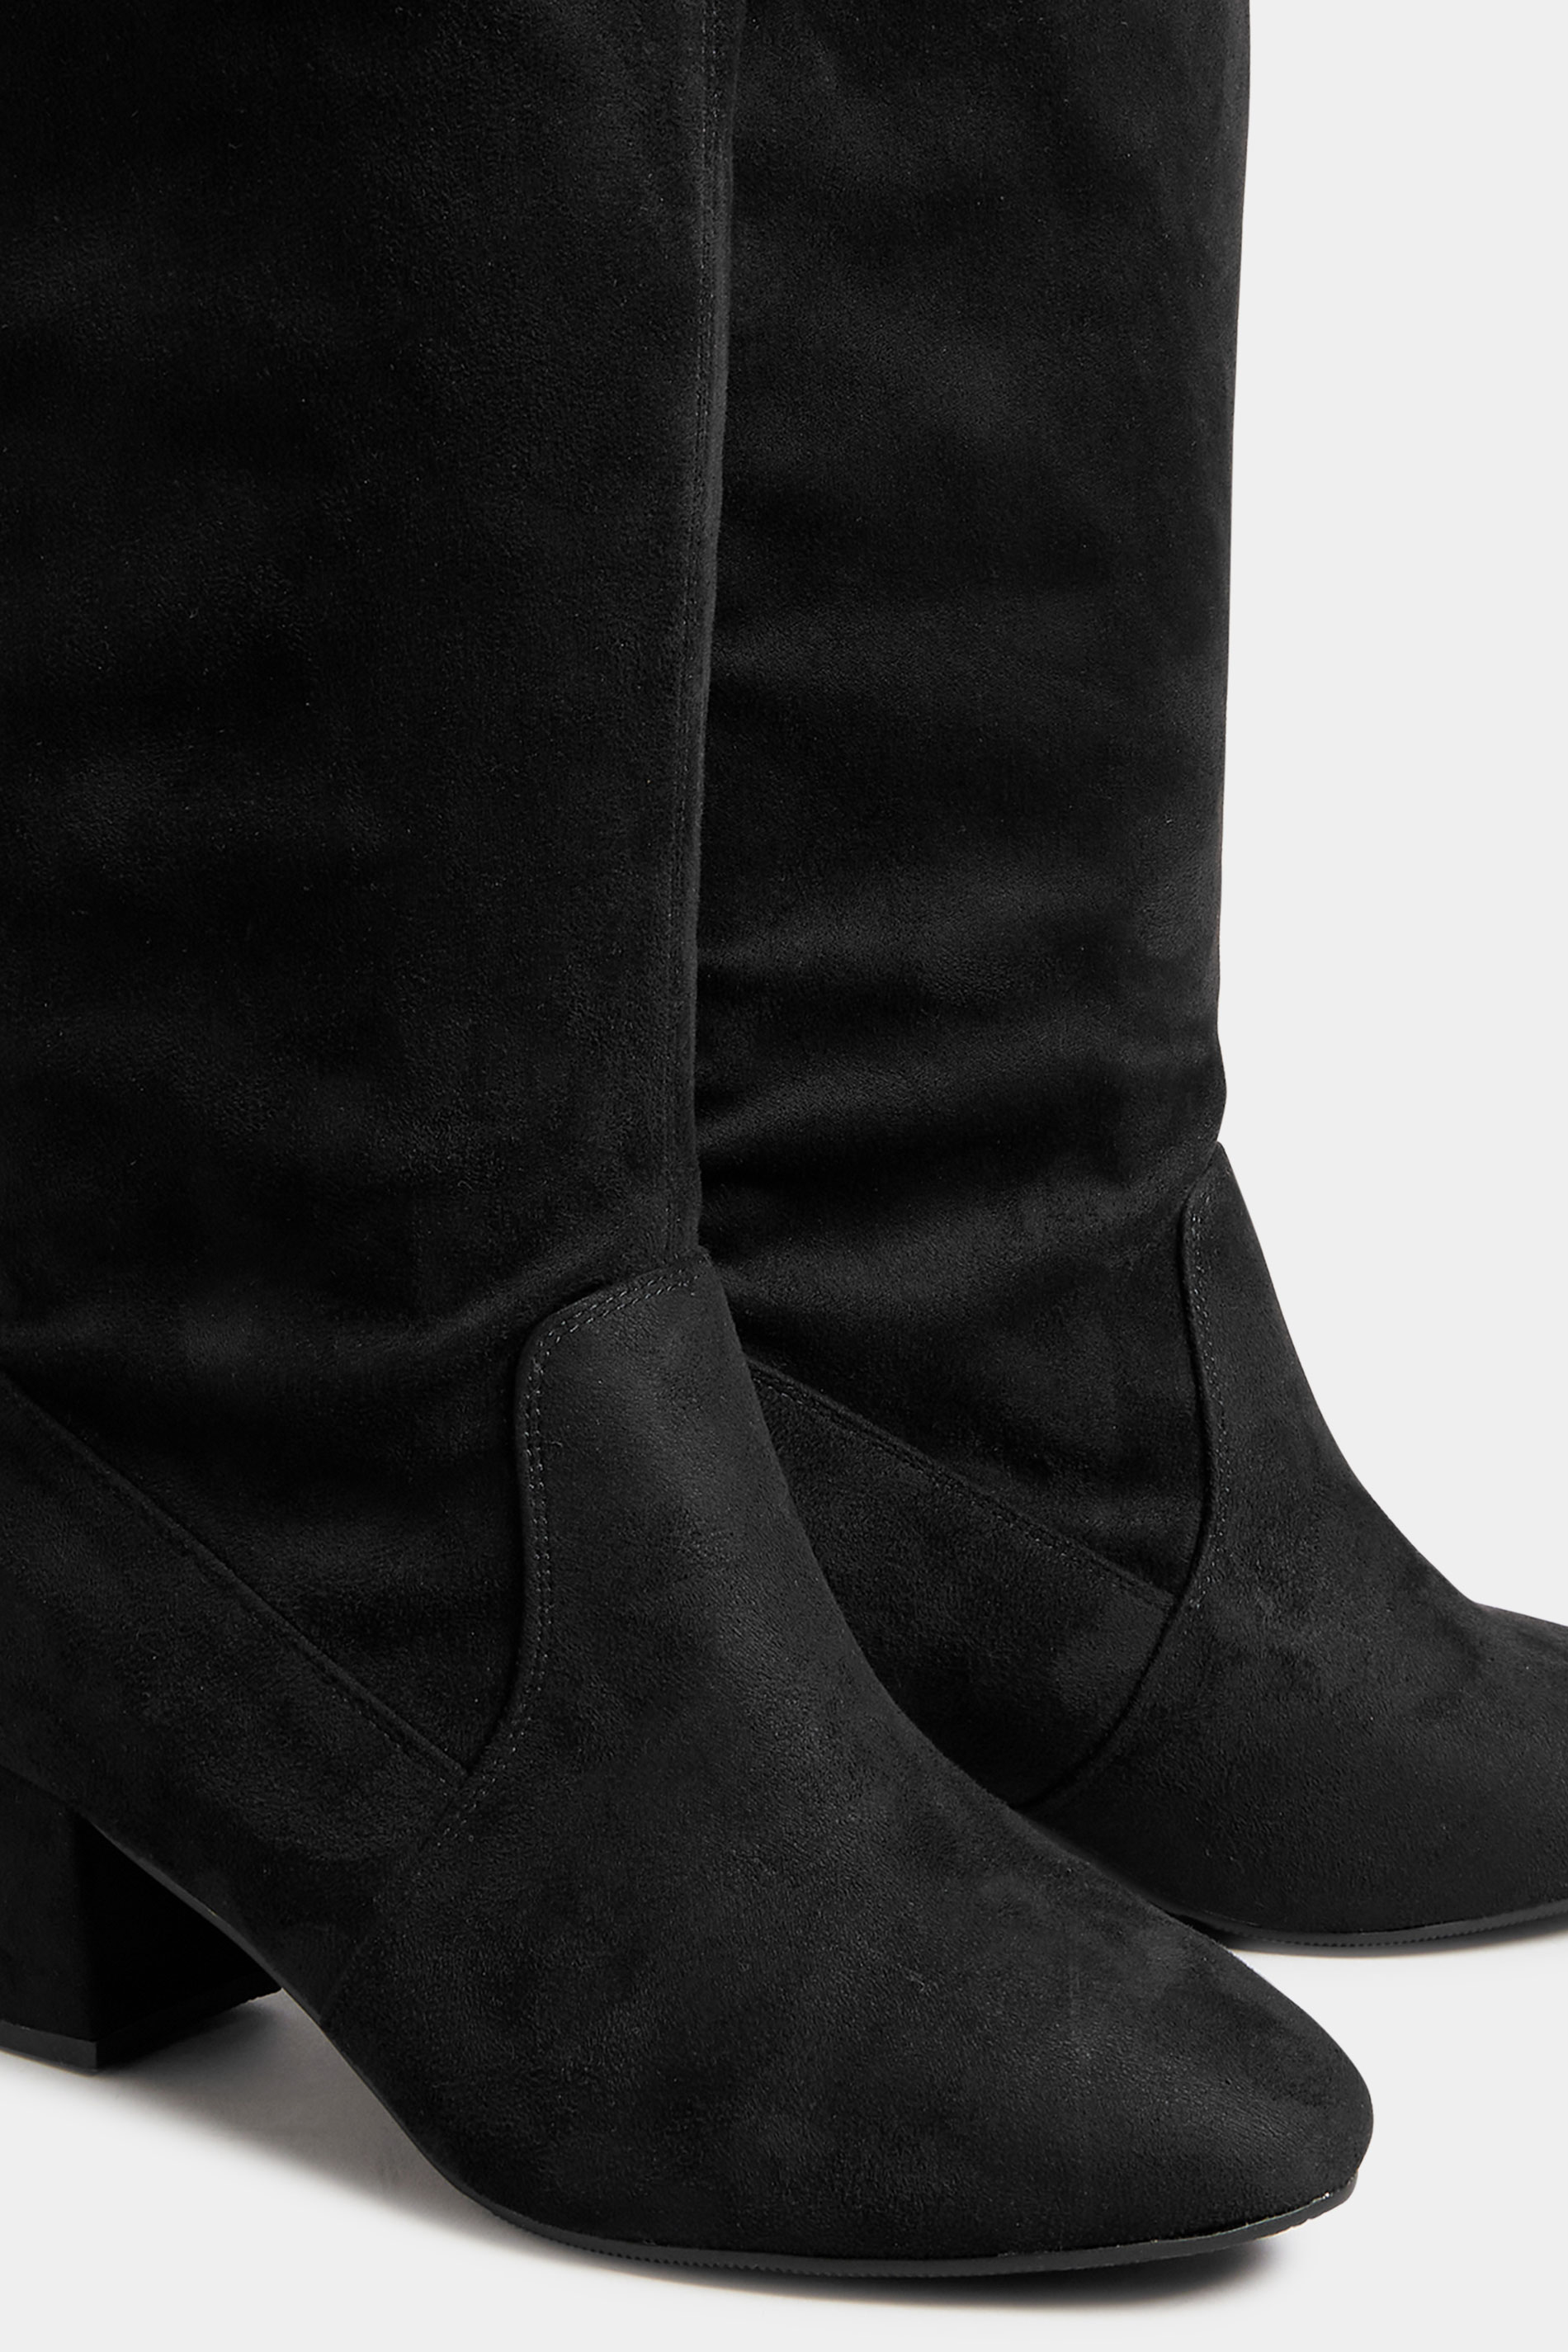 Black Faux Suede Stretch Knee High Boots In Wide E Fit & Extra